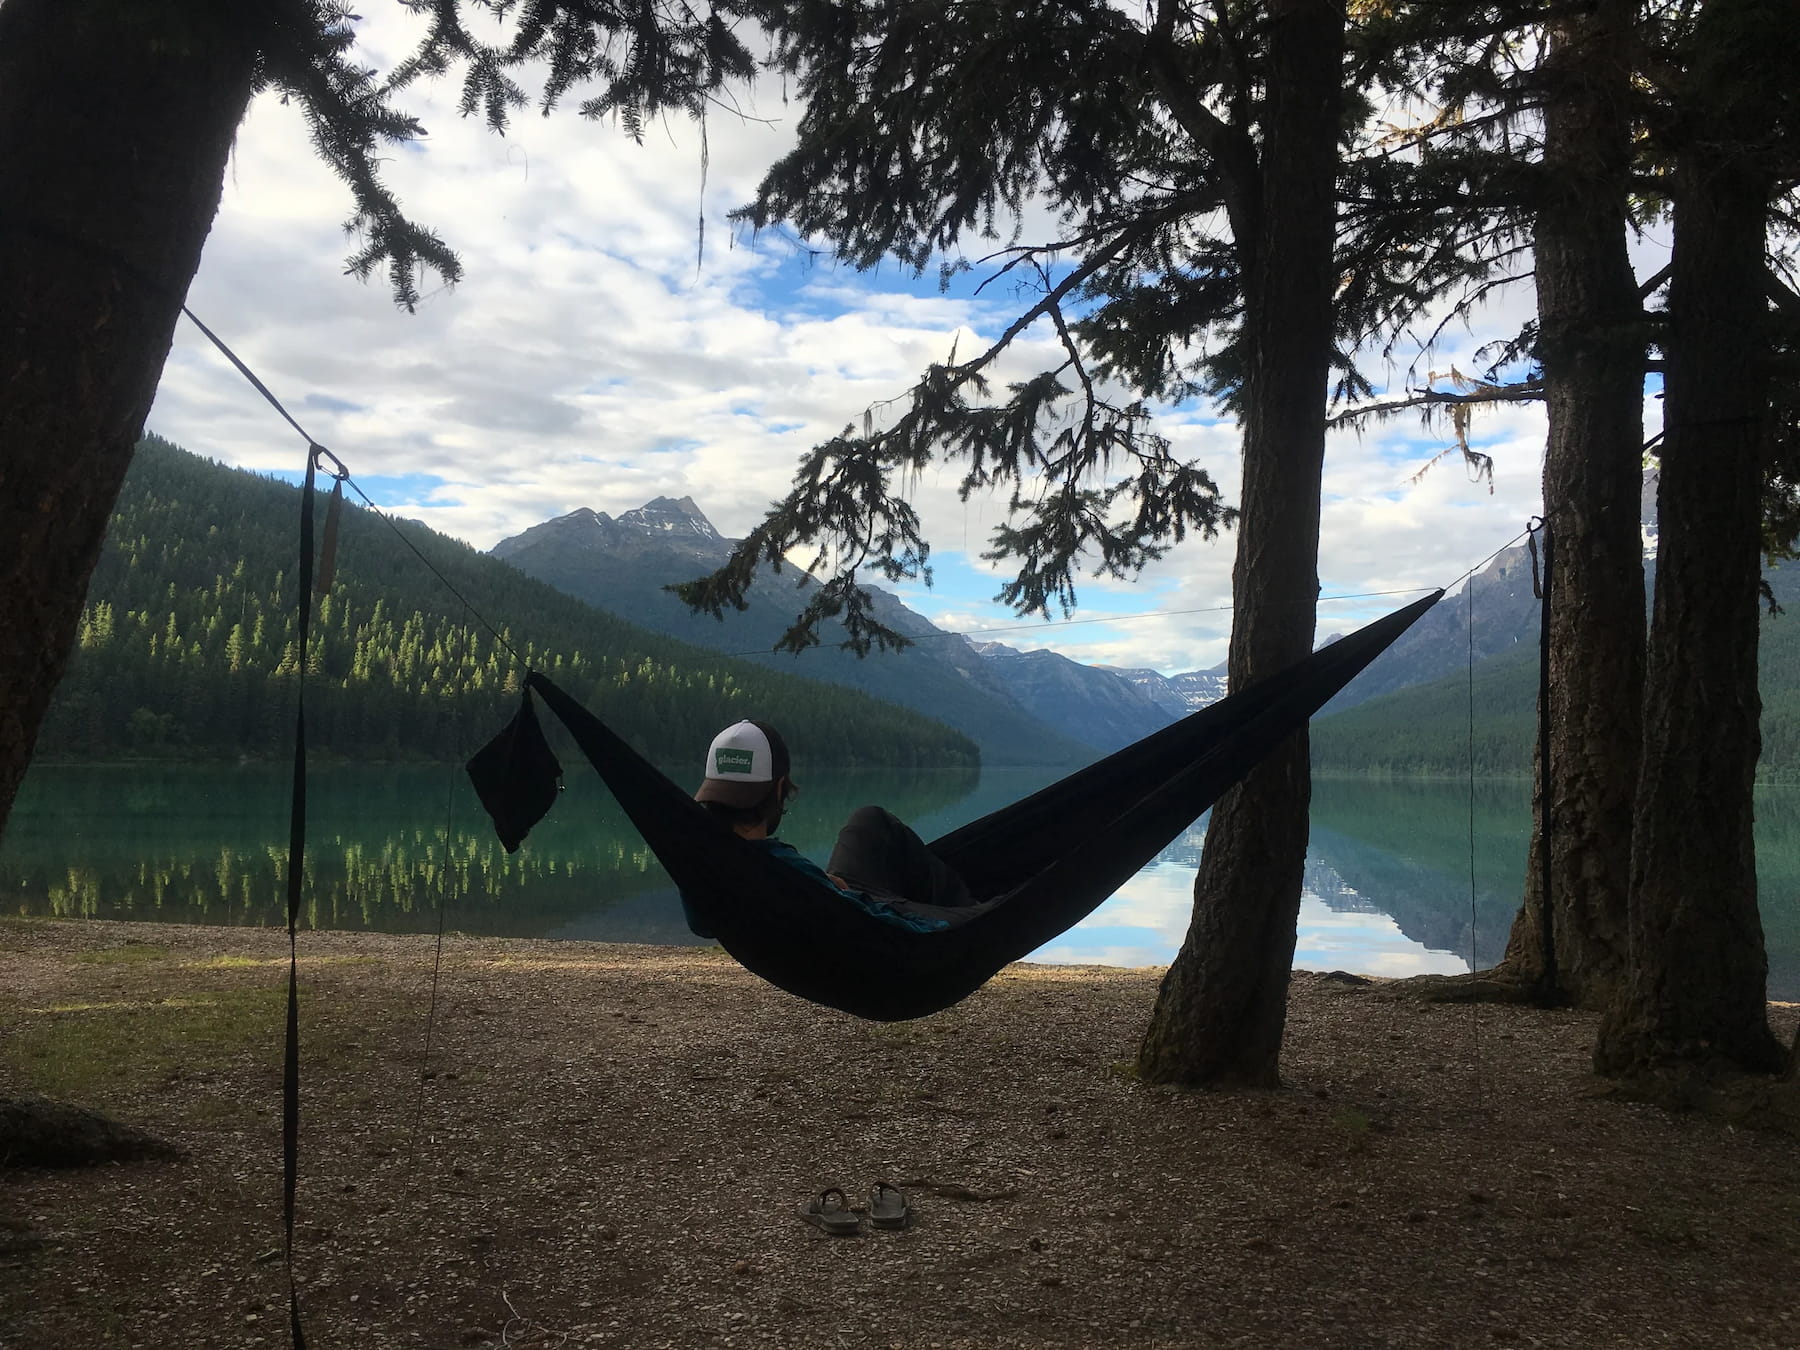 Person in backwards hat in hammock in the forest beside a lake with mountains in the distance.